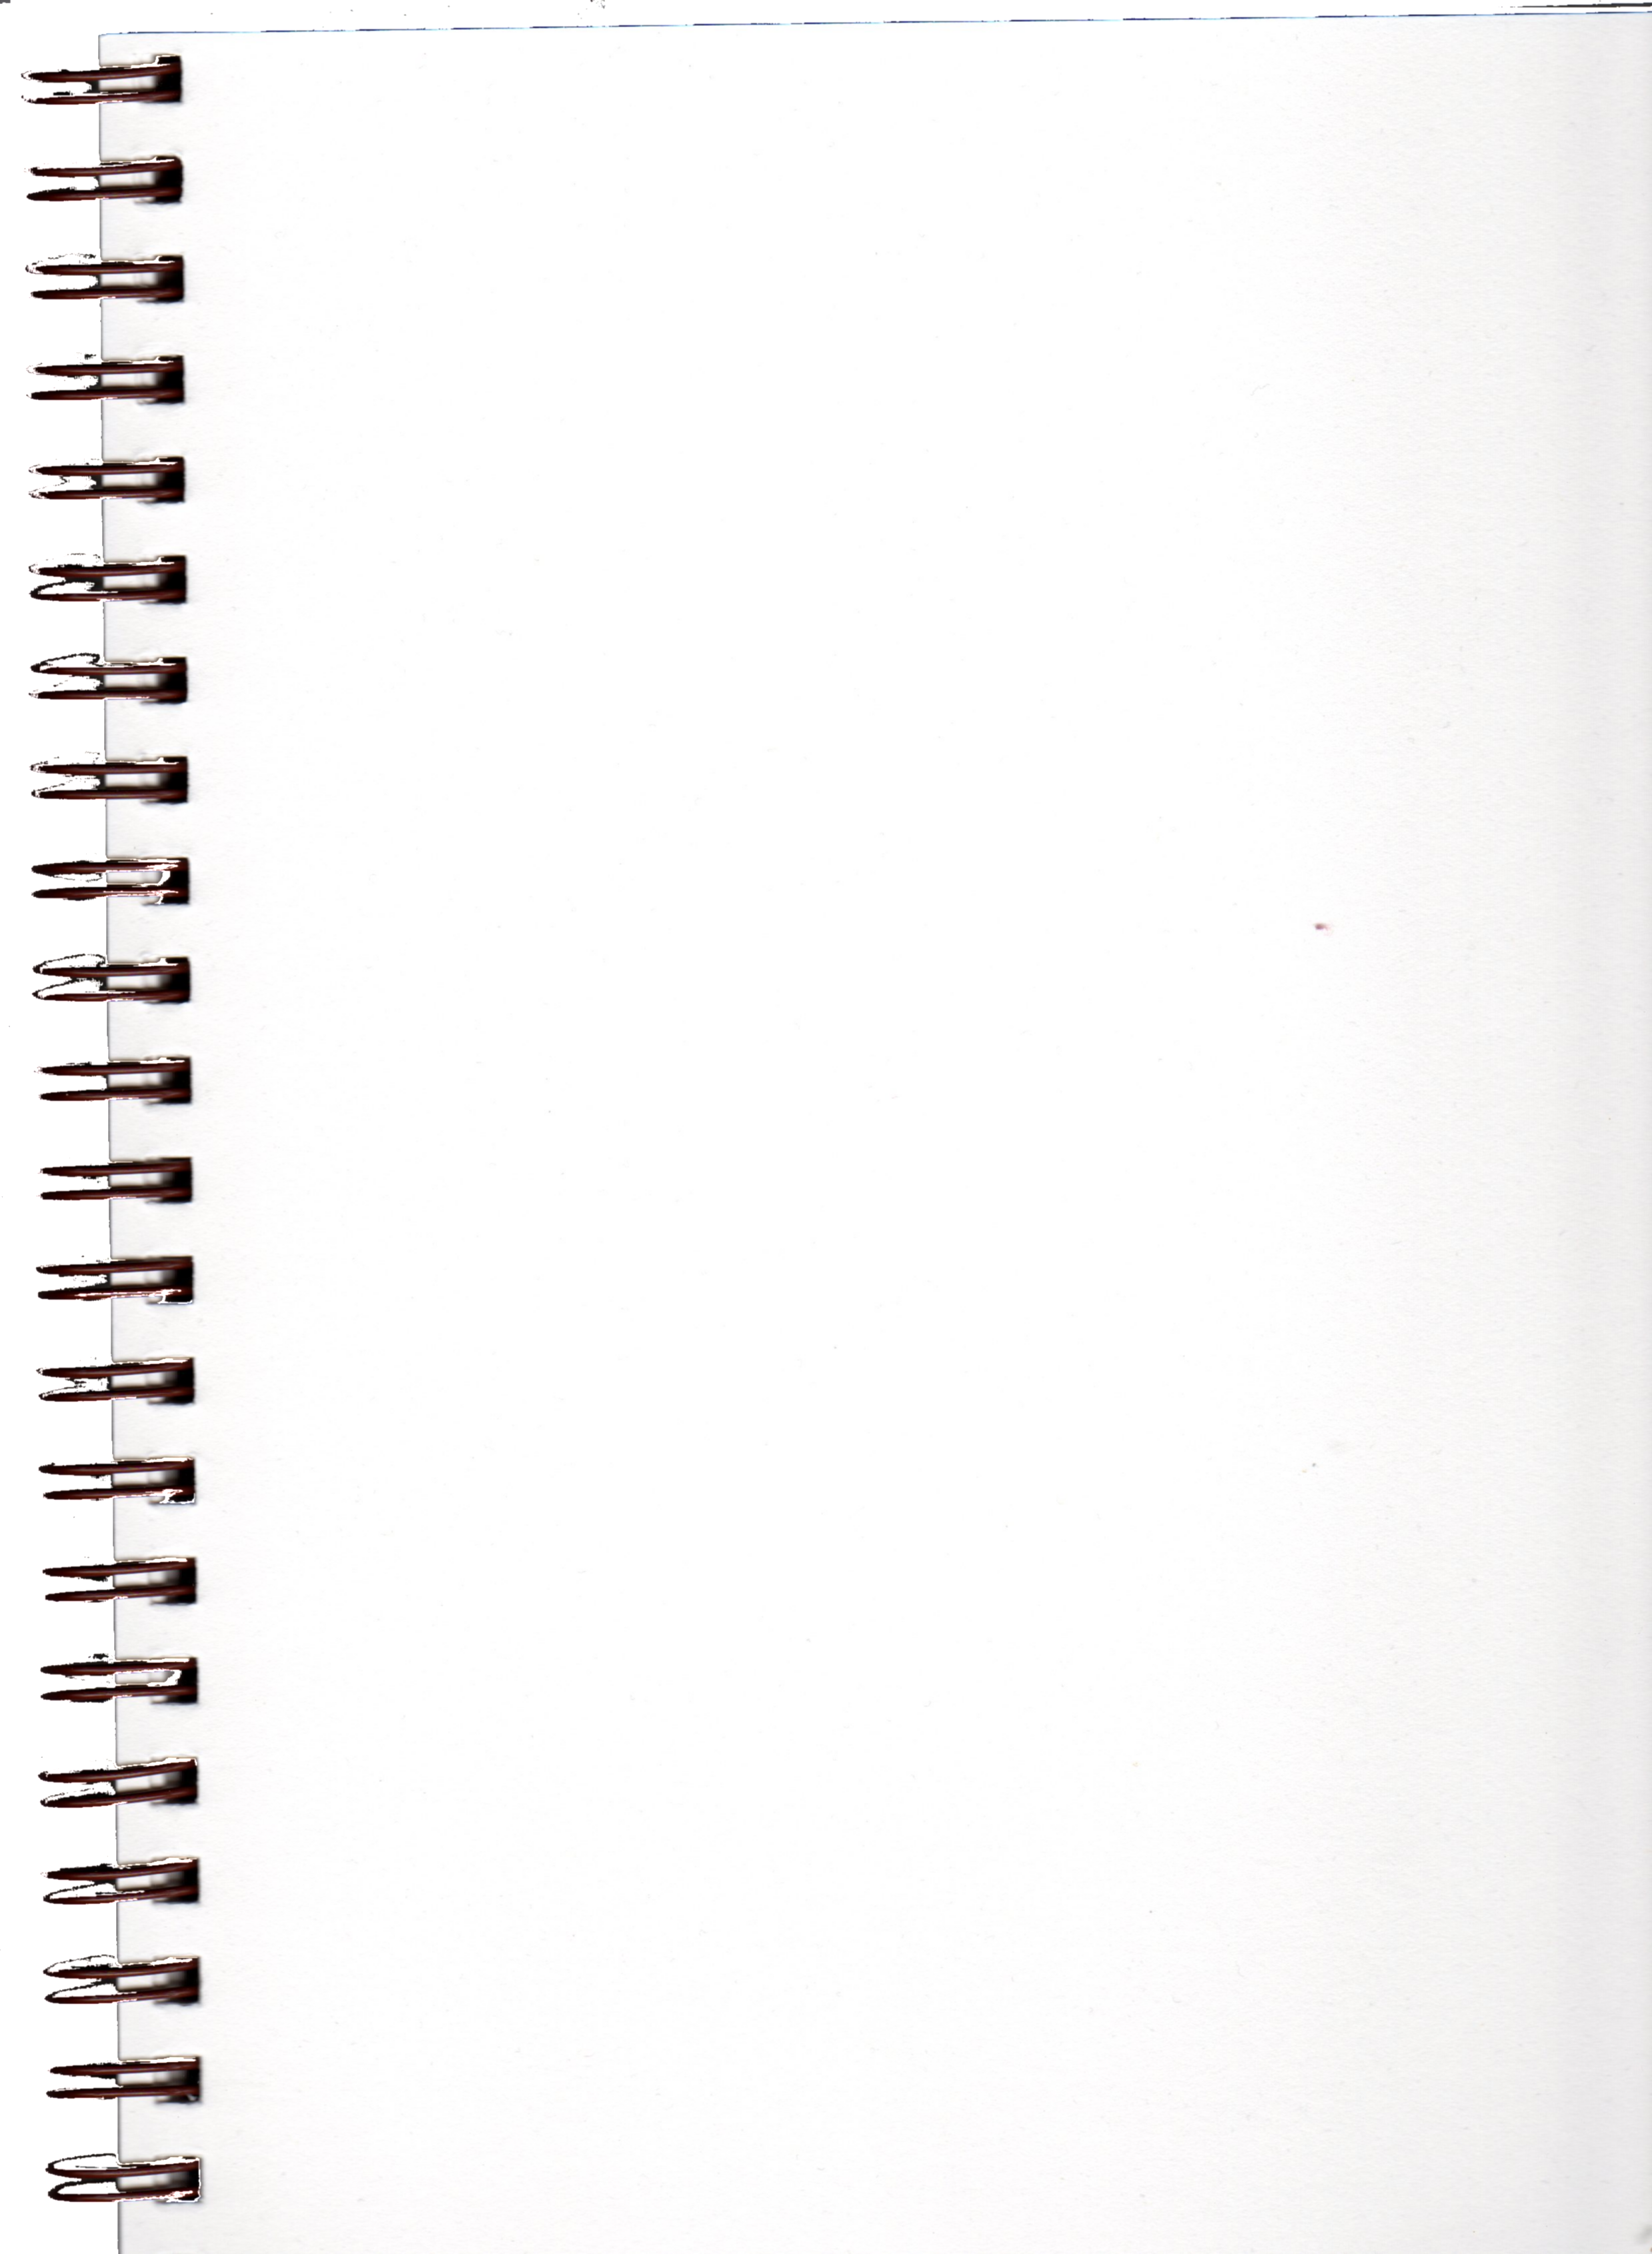 Pre-Cut Blank Spiral Notebook Page